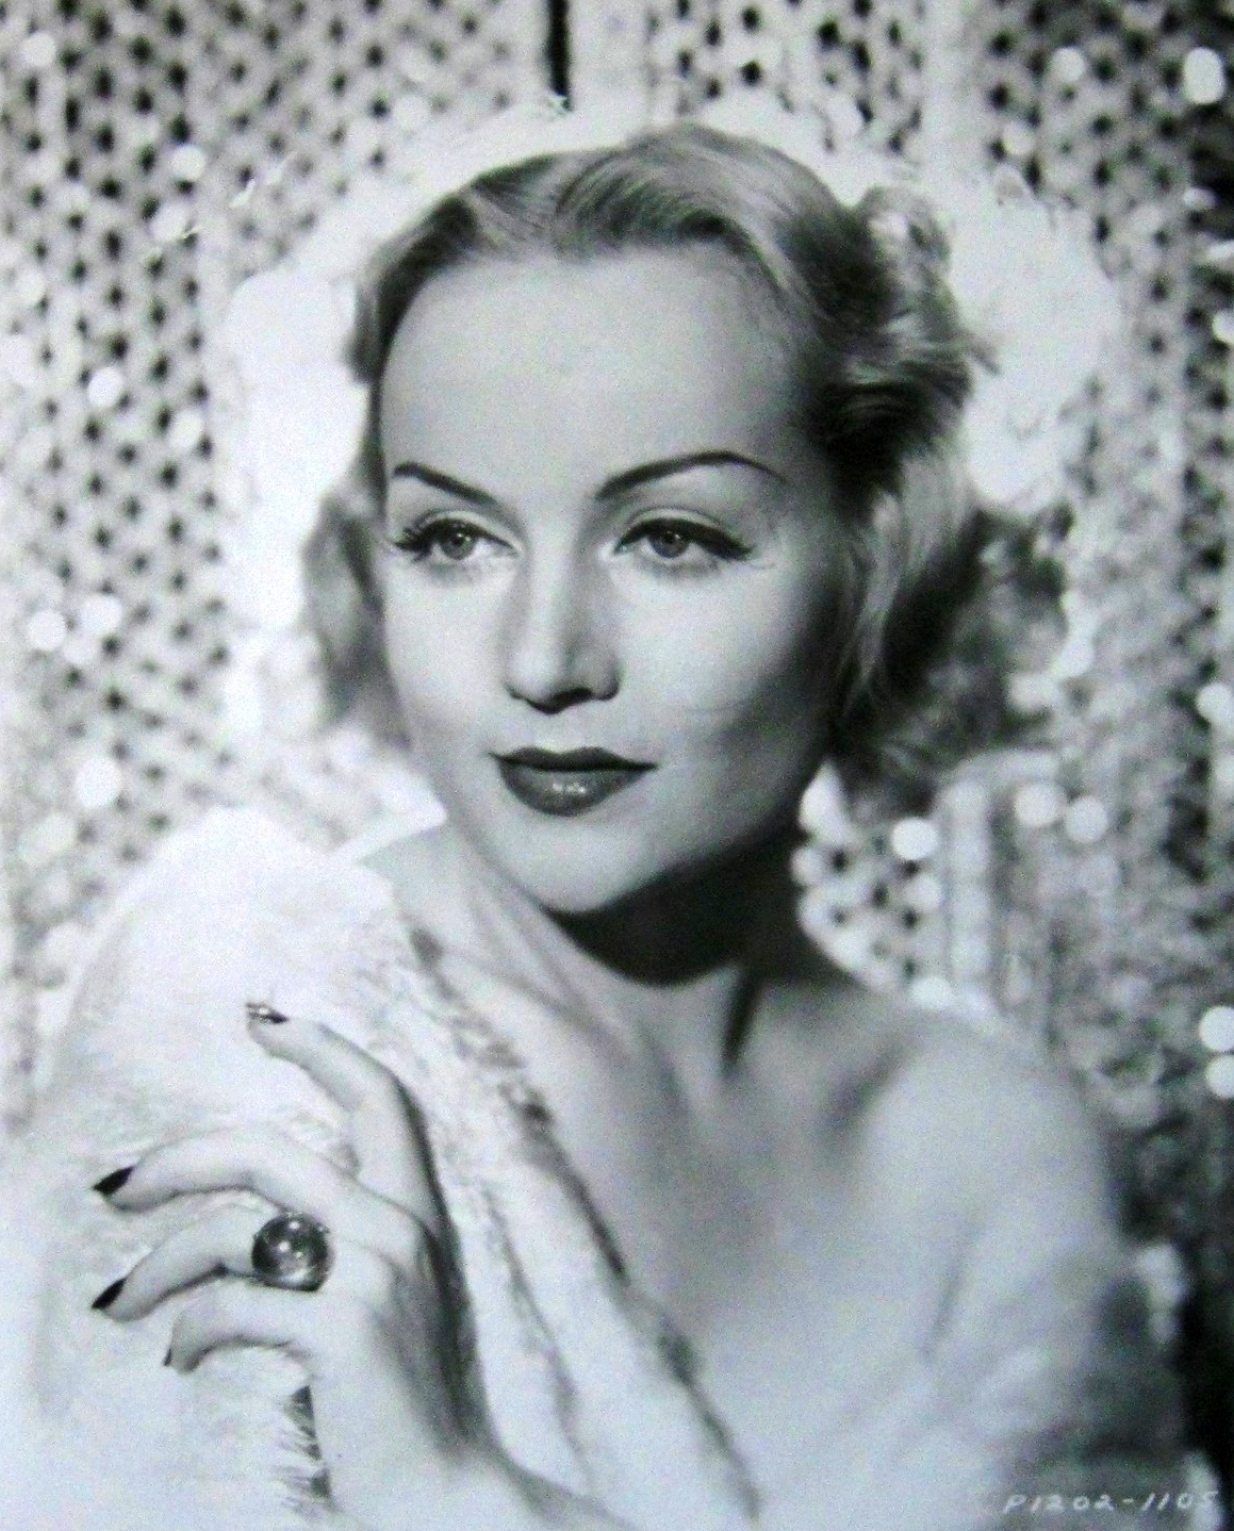 Pictures of Carole Lombard - Pictures Of Celebrities1234 x 1531